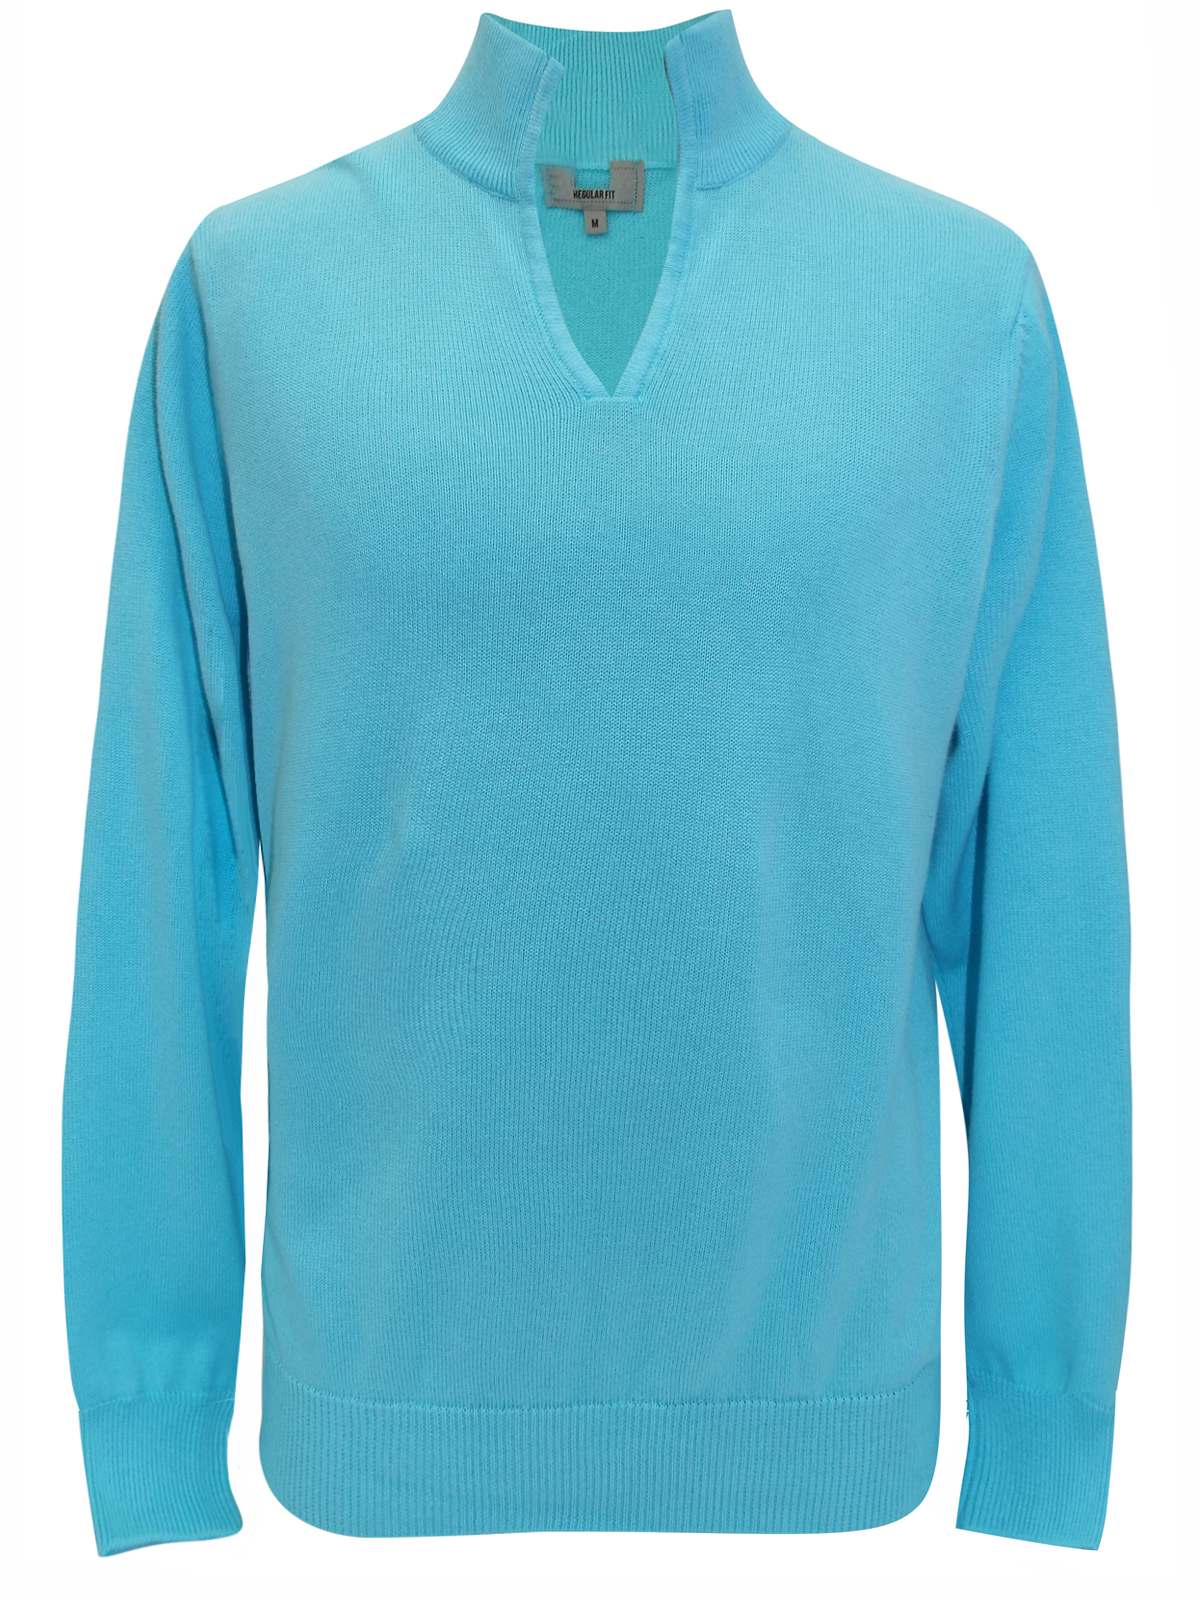 Marks and Spencer - - M&5 AQUA Pure Cotton V-Neck Jumper - Size Small ...